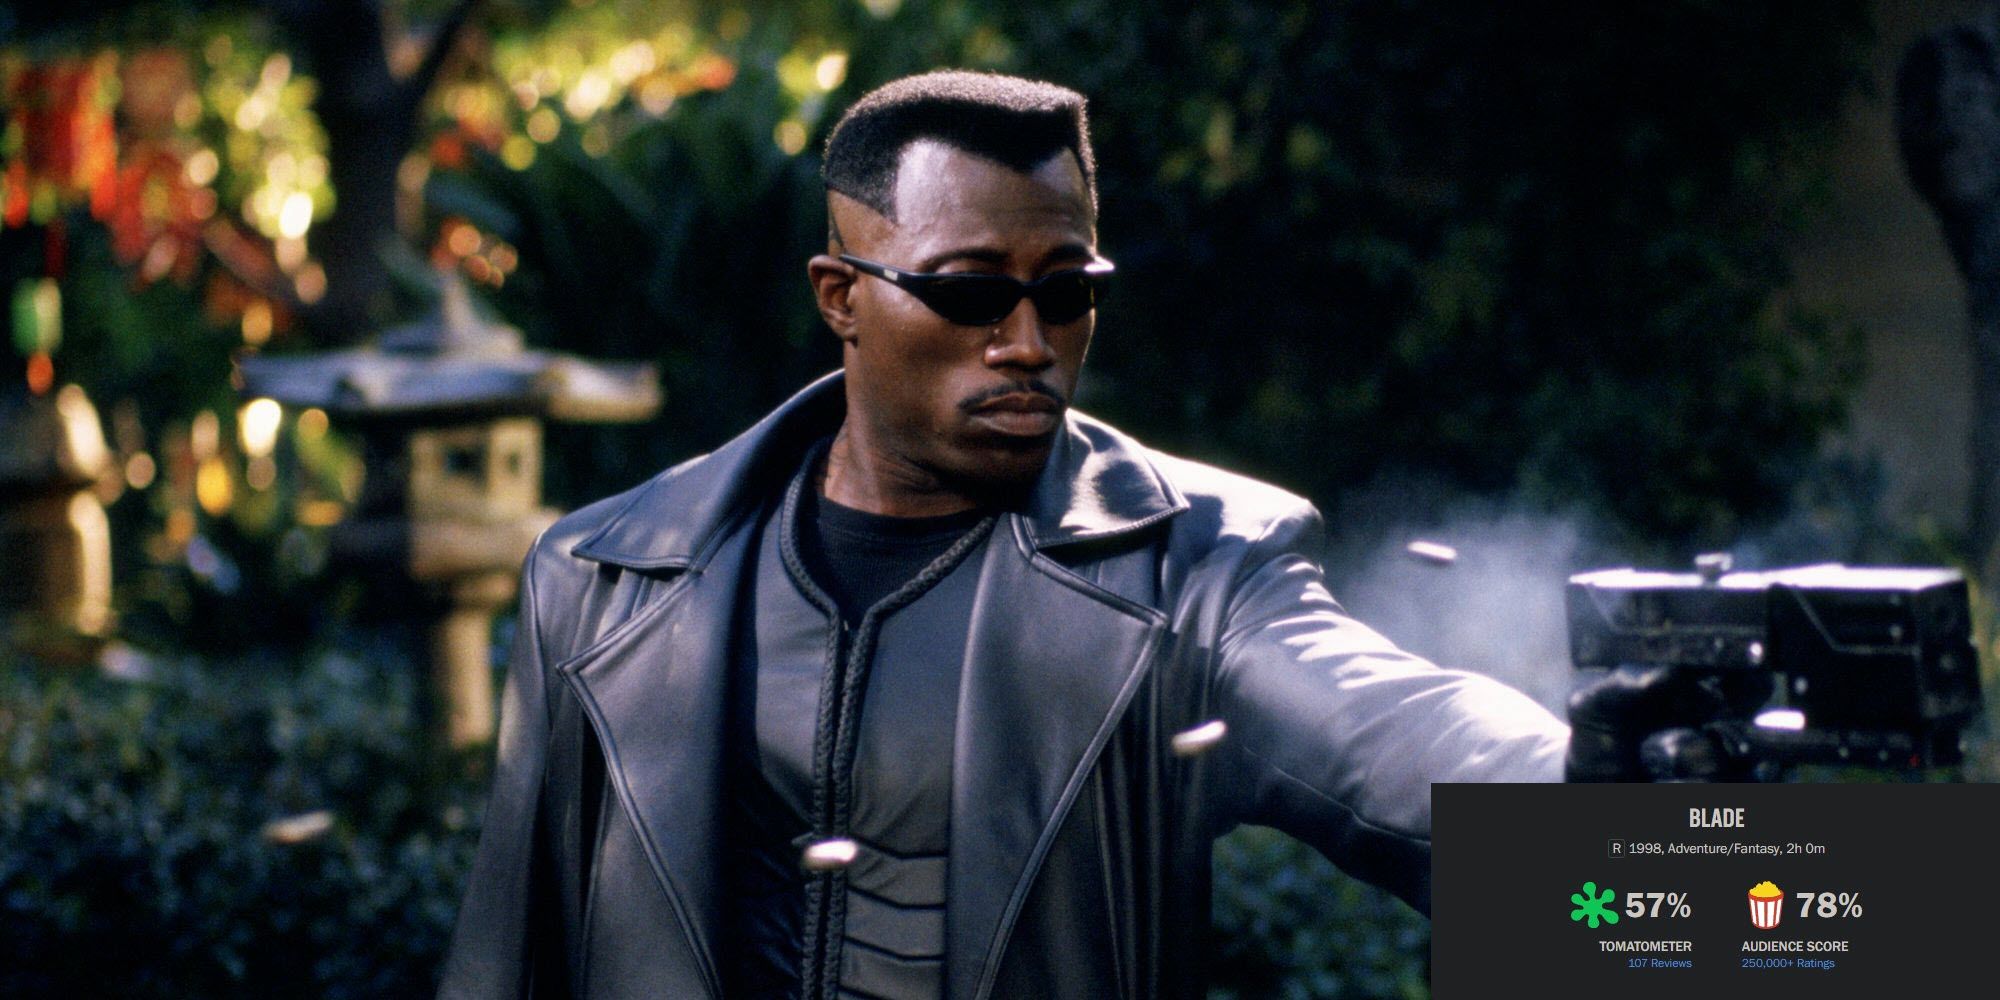 image from the 1998 film Blade featuring Wesley Snipes as vampire hunter Blade with a gun in hand